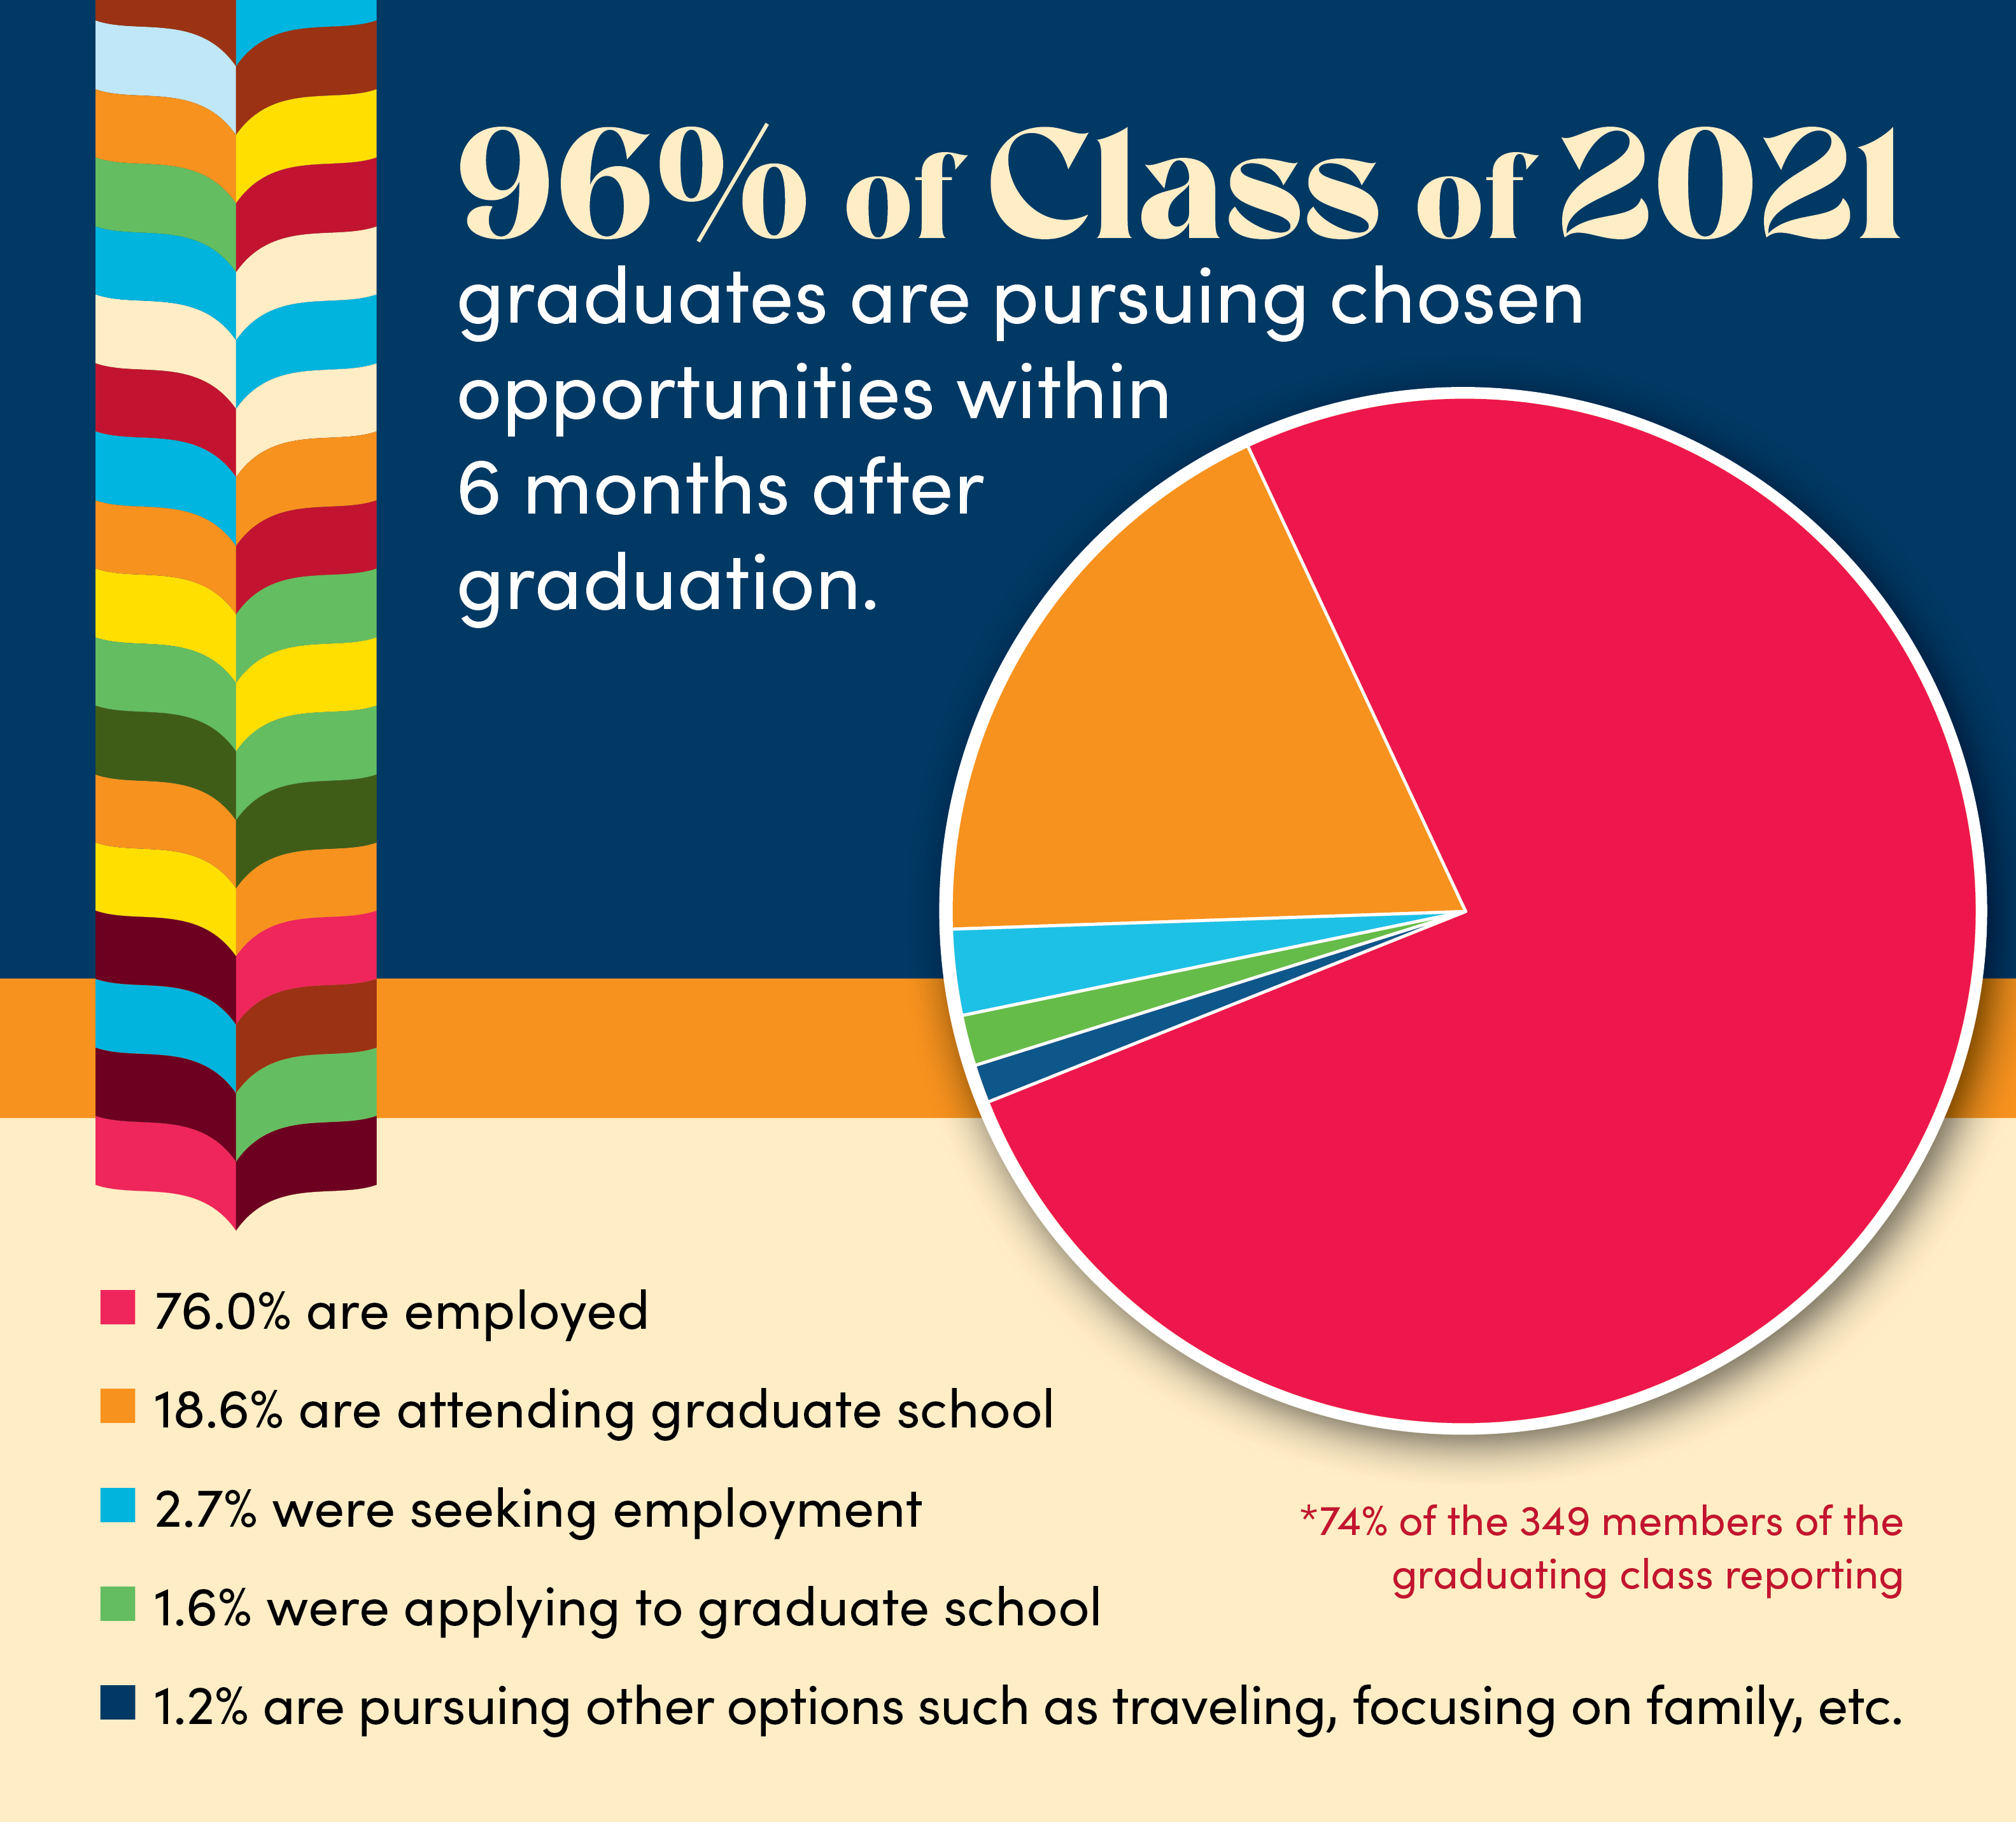 CAC Infographic: 96% of Class of 2021 graduates are pursuing chosen opportunities within 6-9 months of graduation..